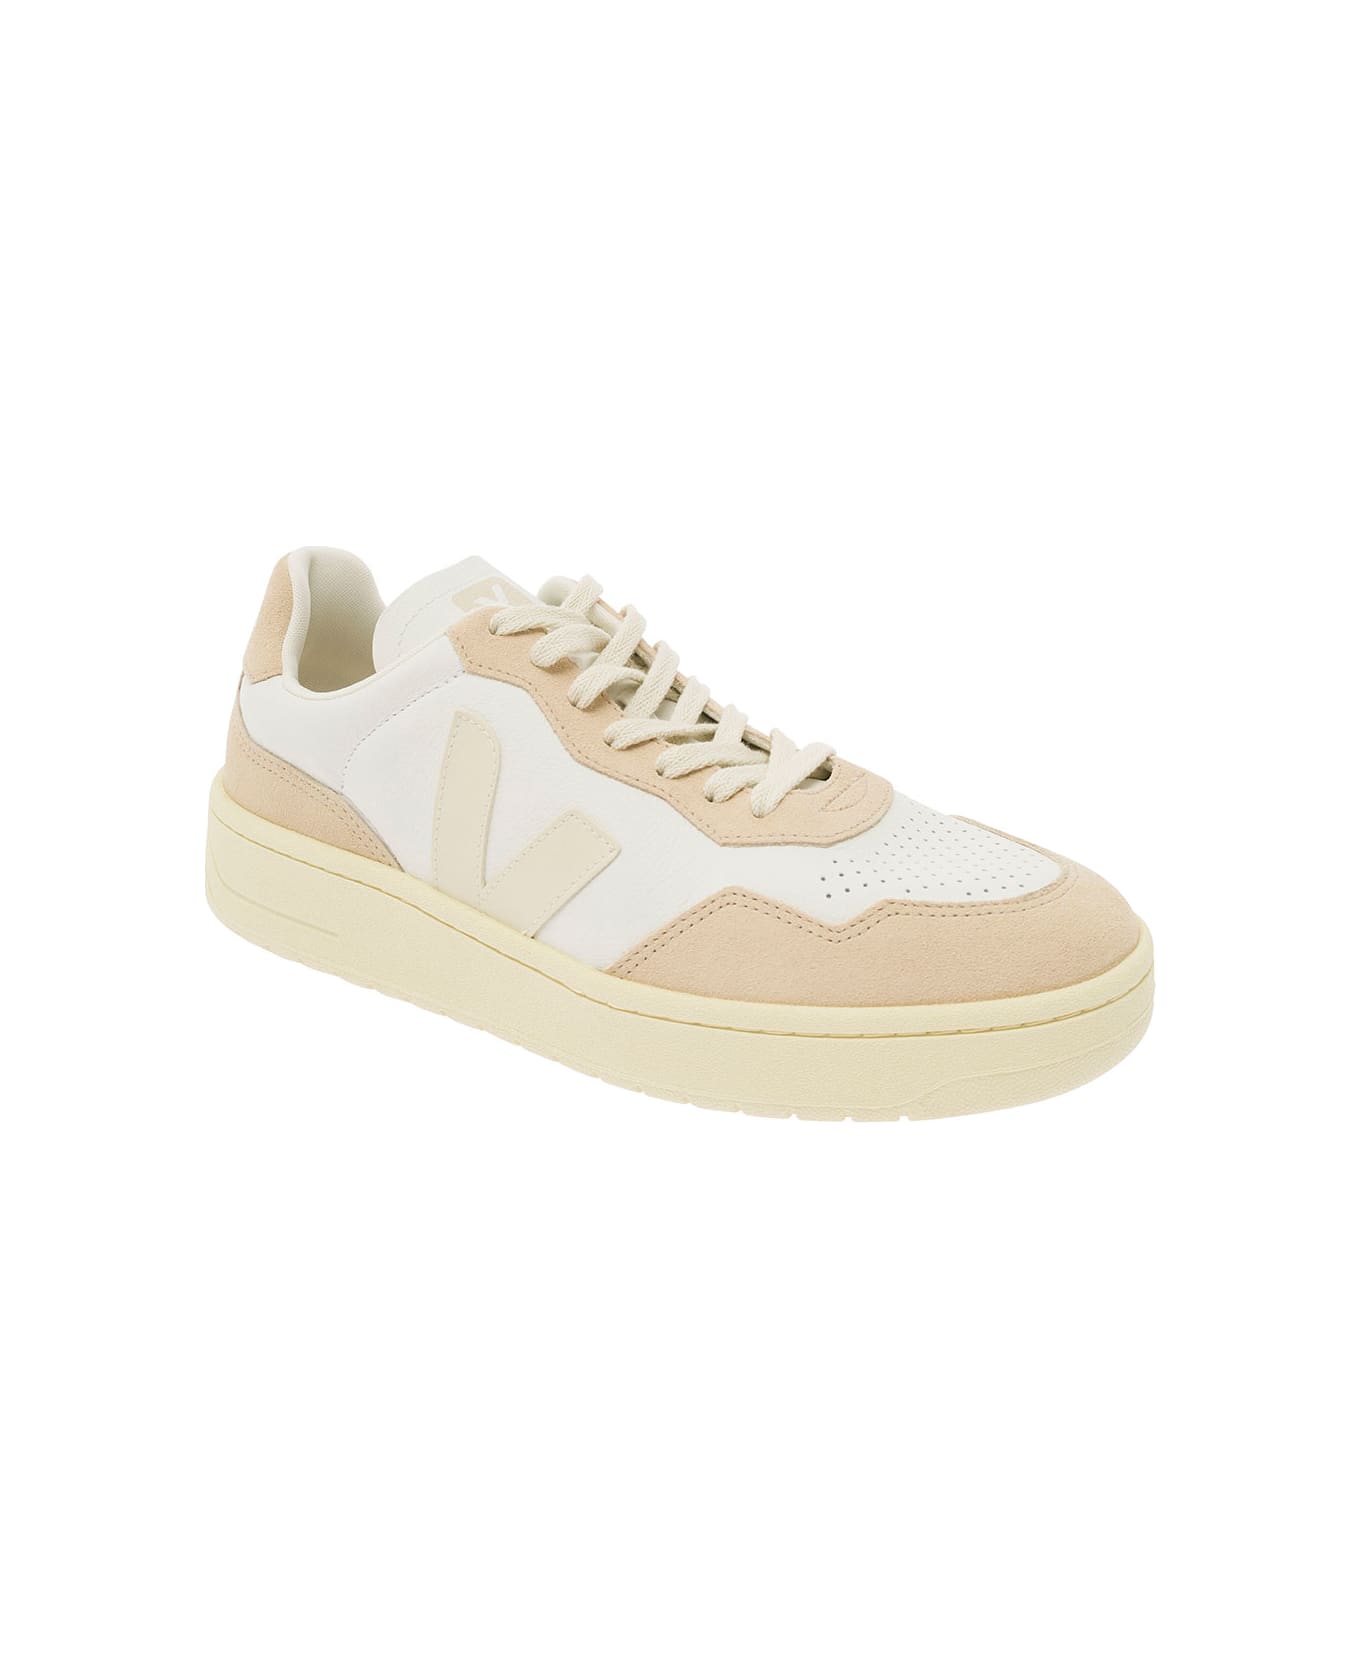 Veja White And Beige Sneakers With Logo Details In Leather Man - Beige